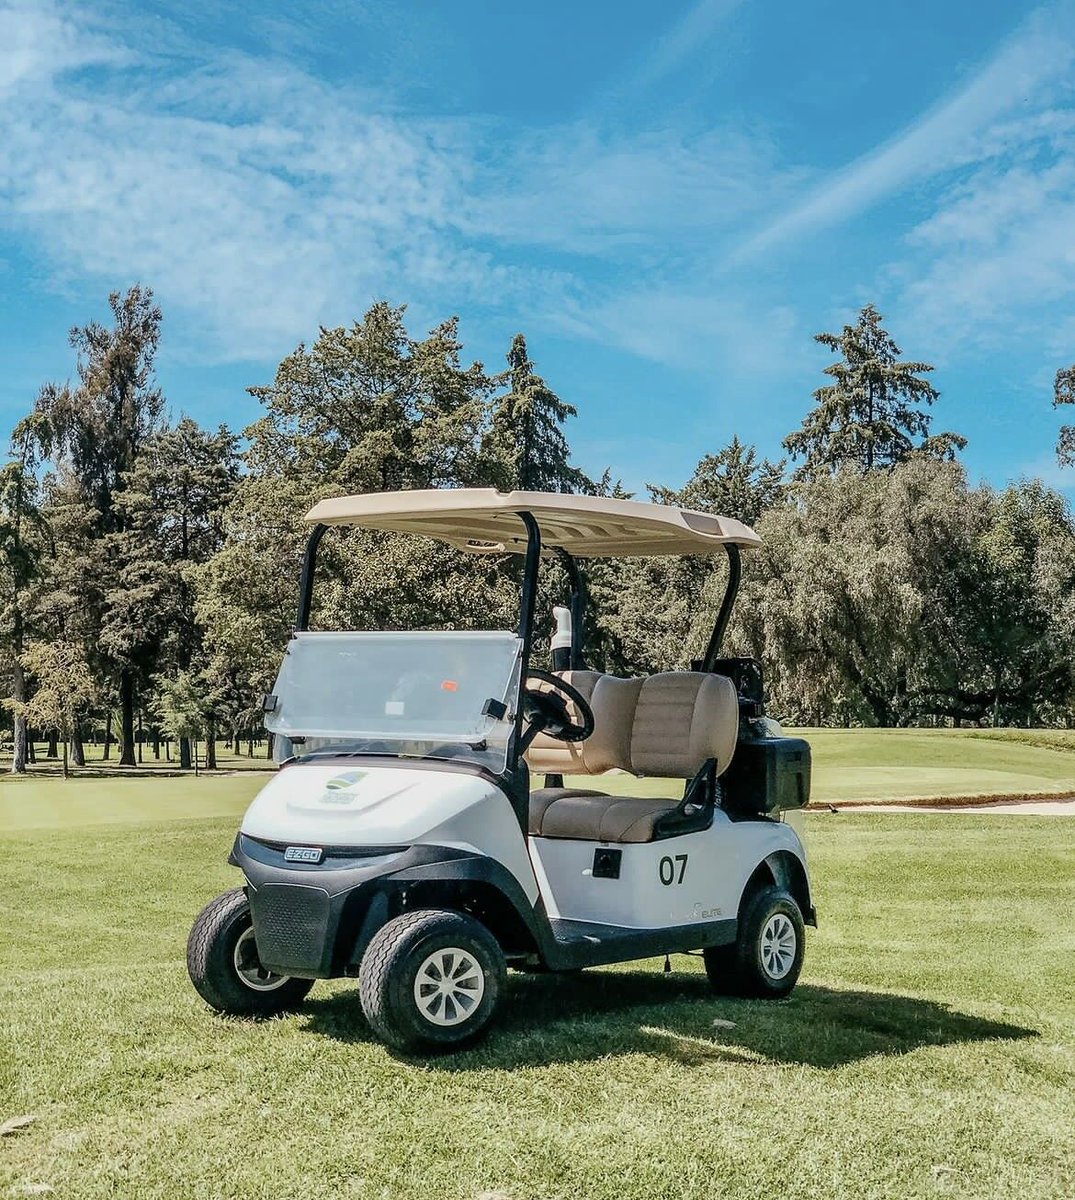 When life gives you fairways, make it a day on the green. Our E-Z-GO is ready for some sunny, Sunday fun! ⛳

📷: @tecnogolf 

#EZGO #ItsGoodToGo